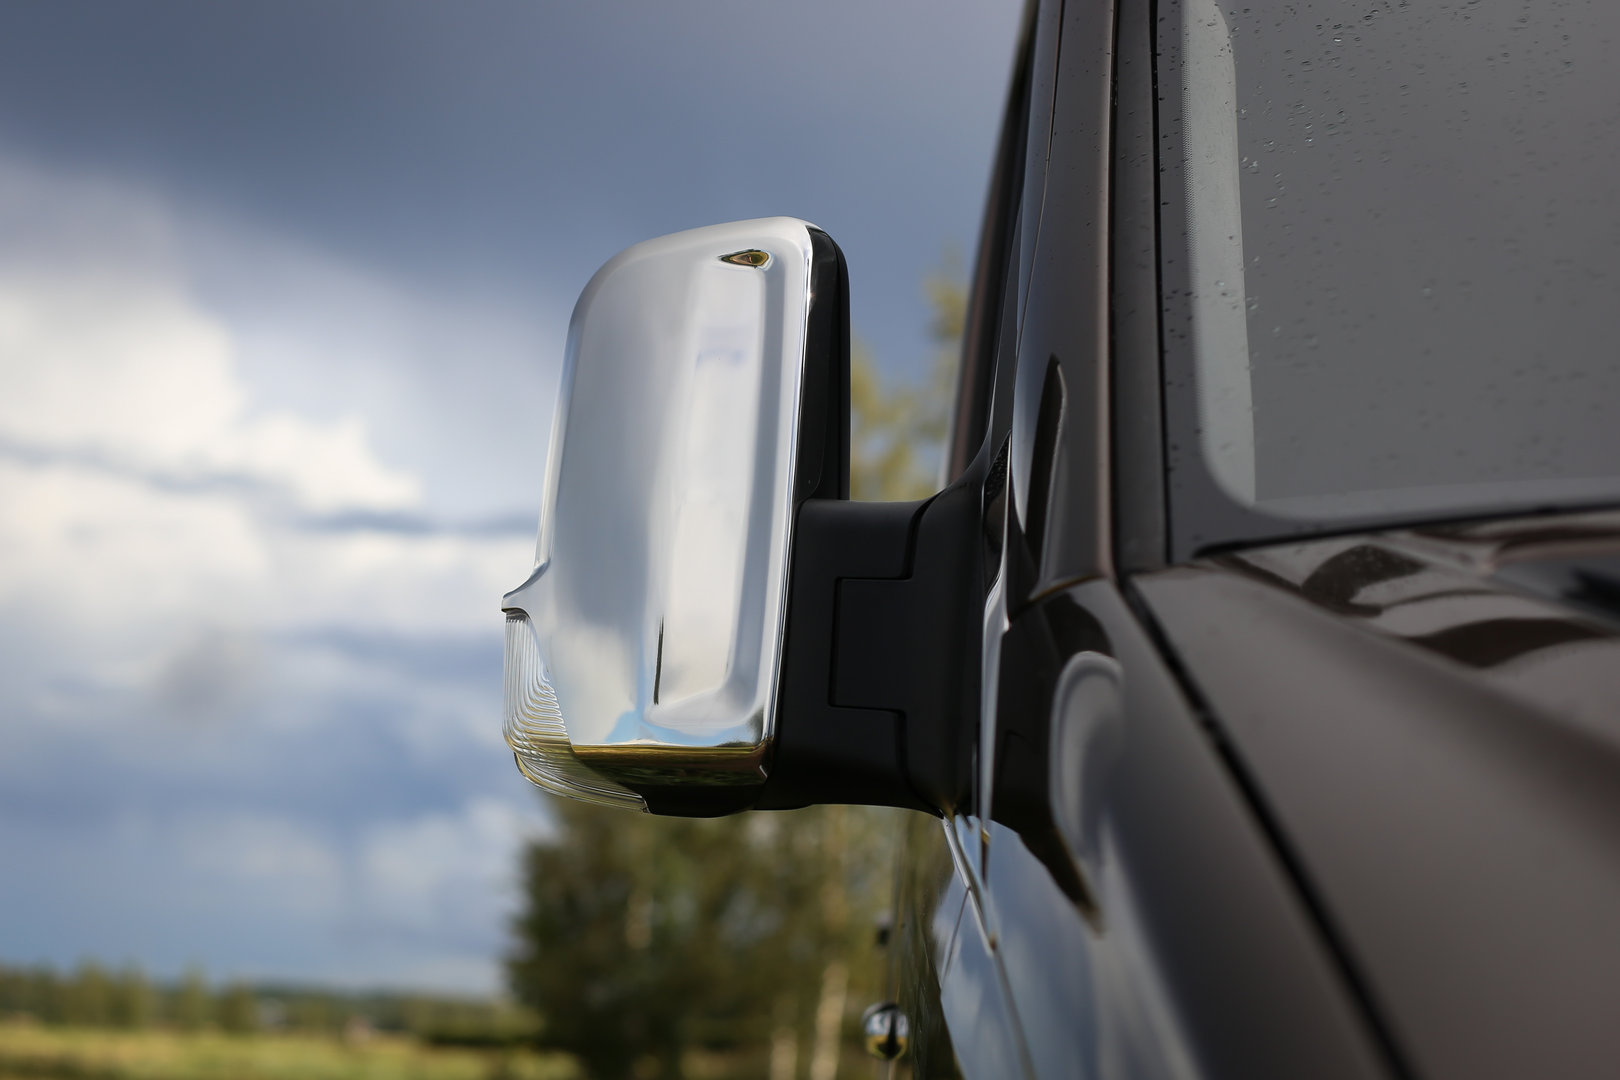 VW Crafter Mirror covers